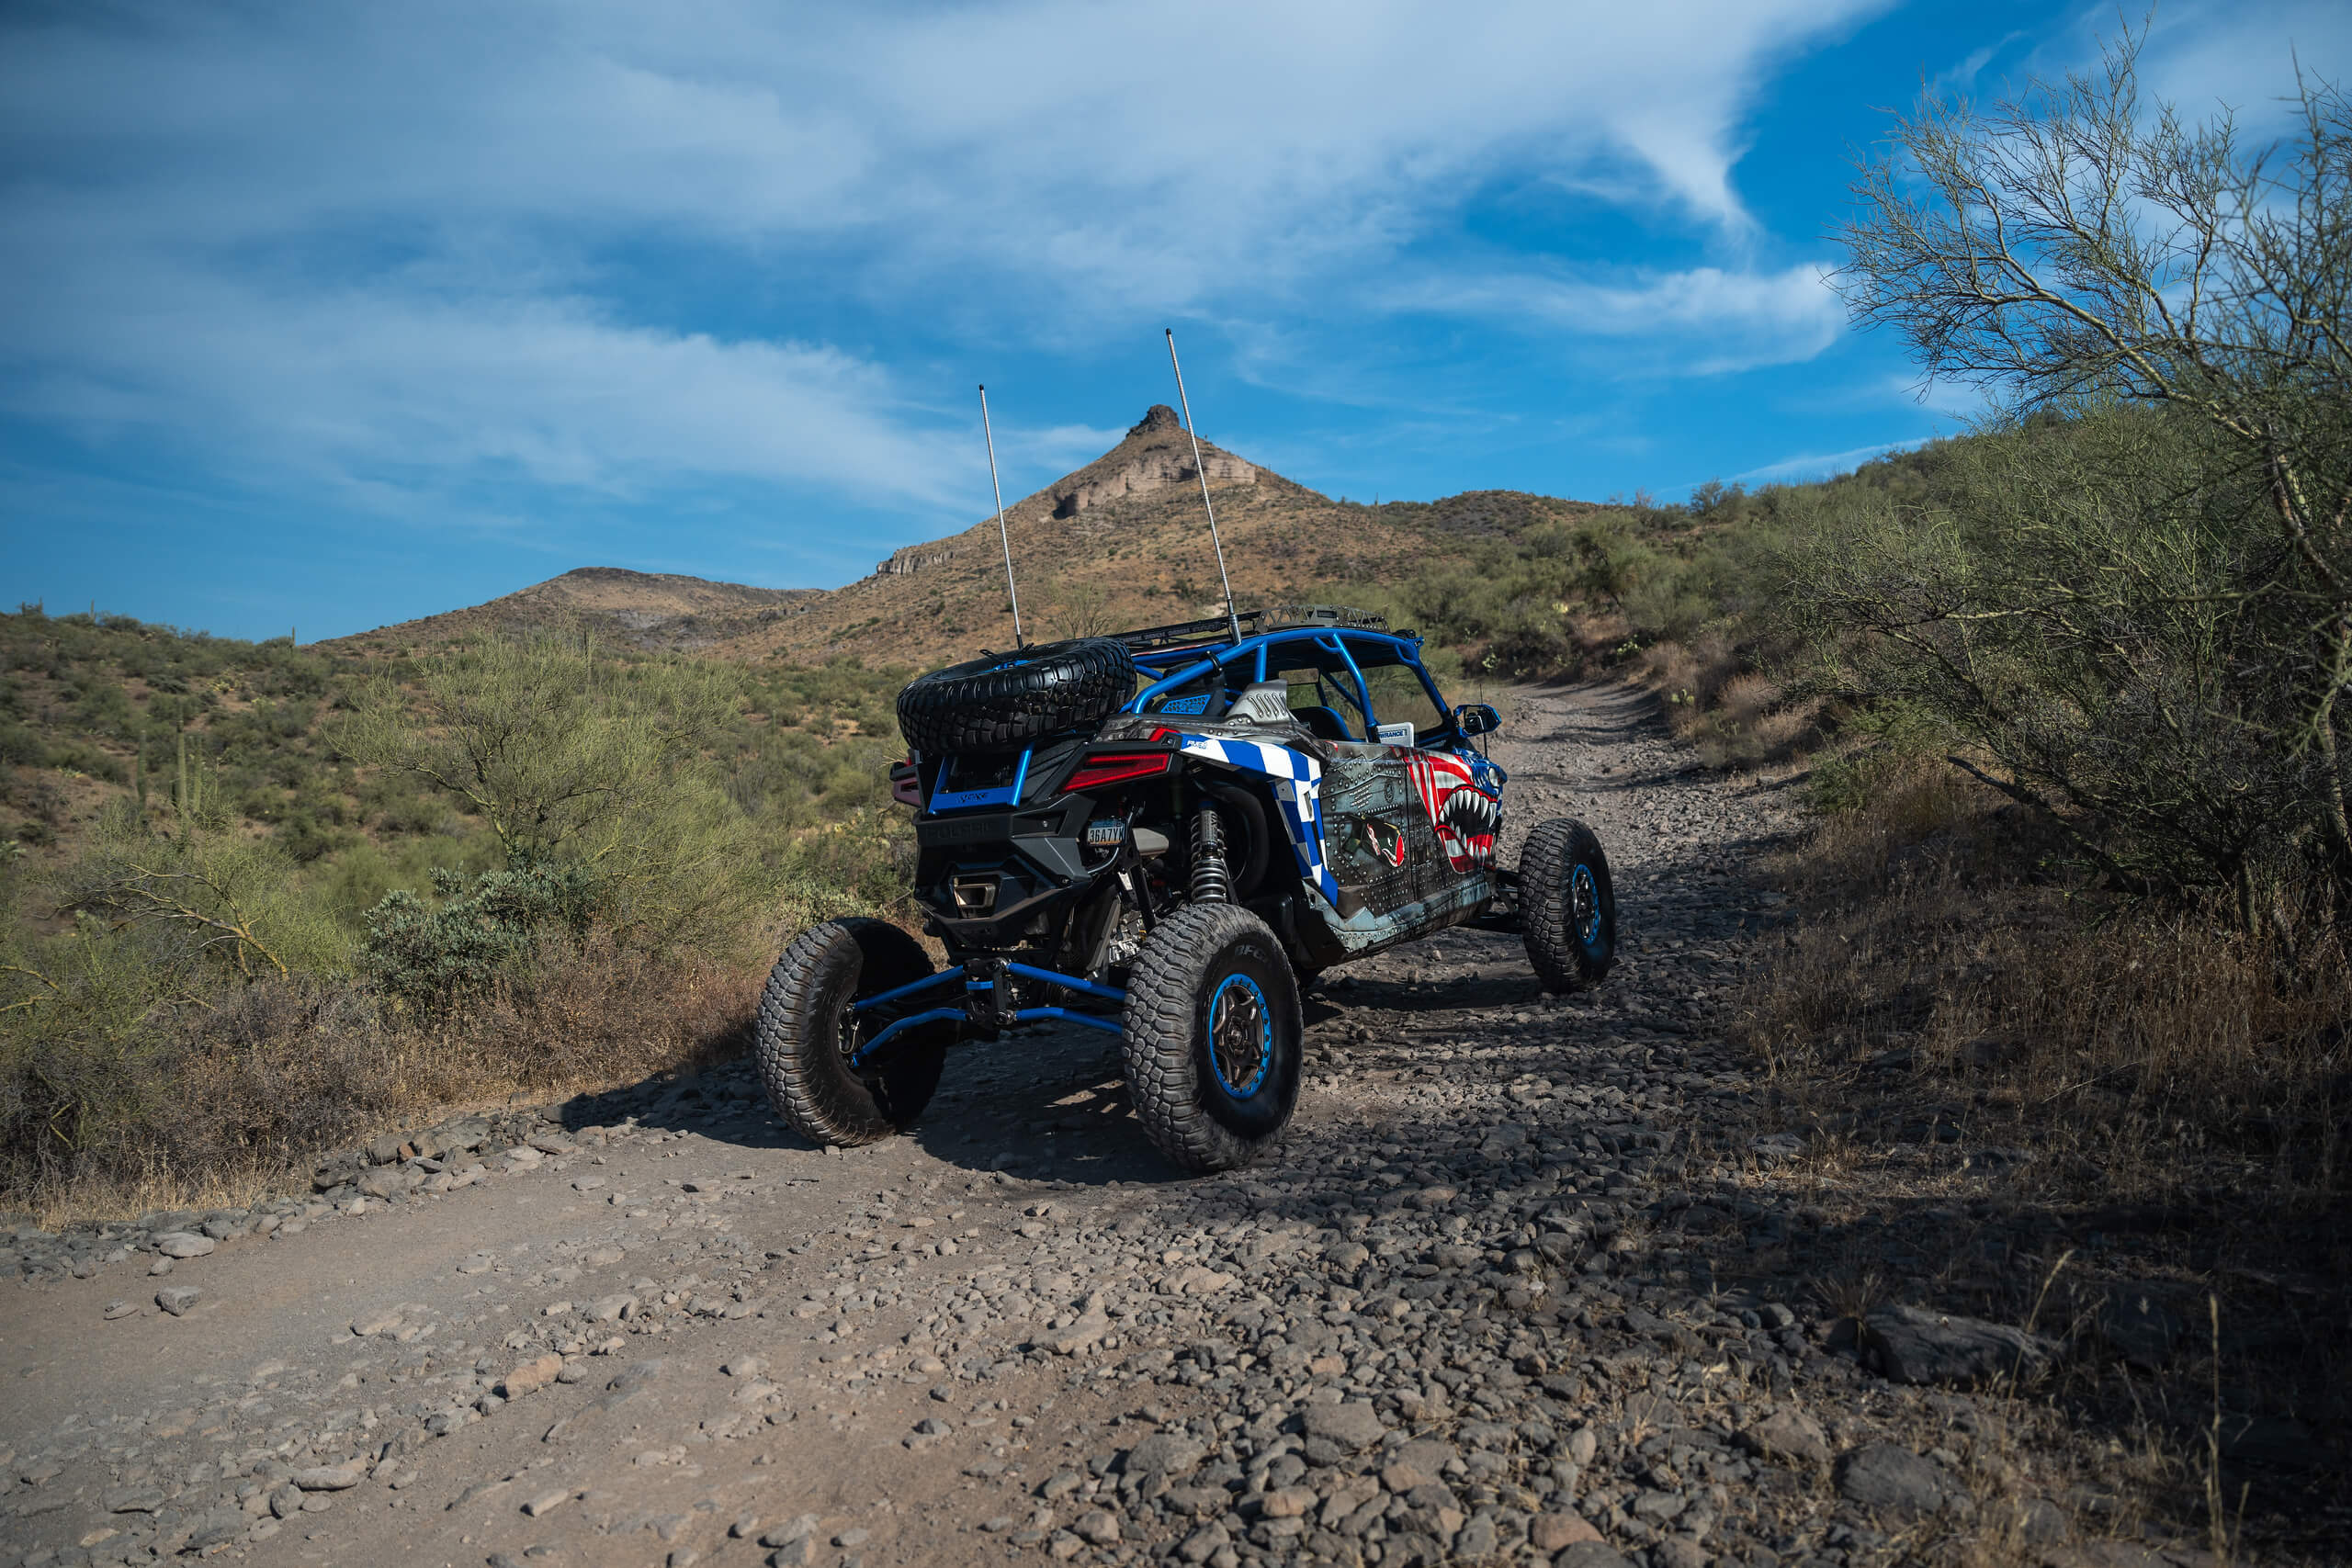 Mike Ericksons Polaris RZR Pro R Custom Build By Jagged X Offroad 14